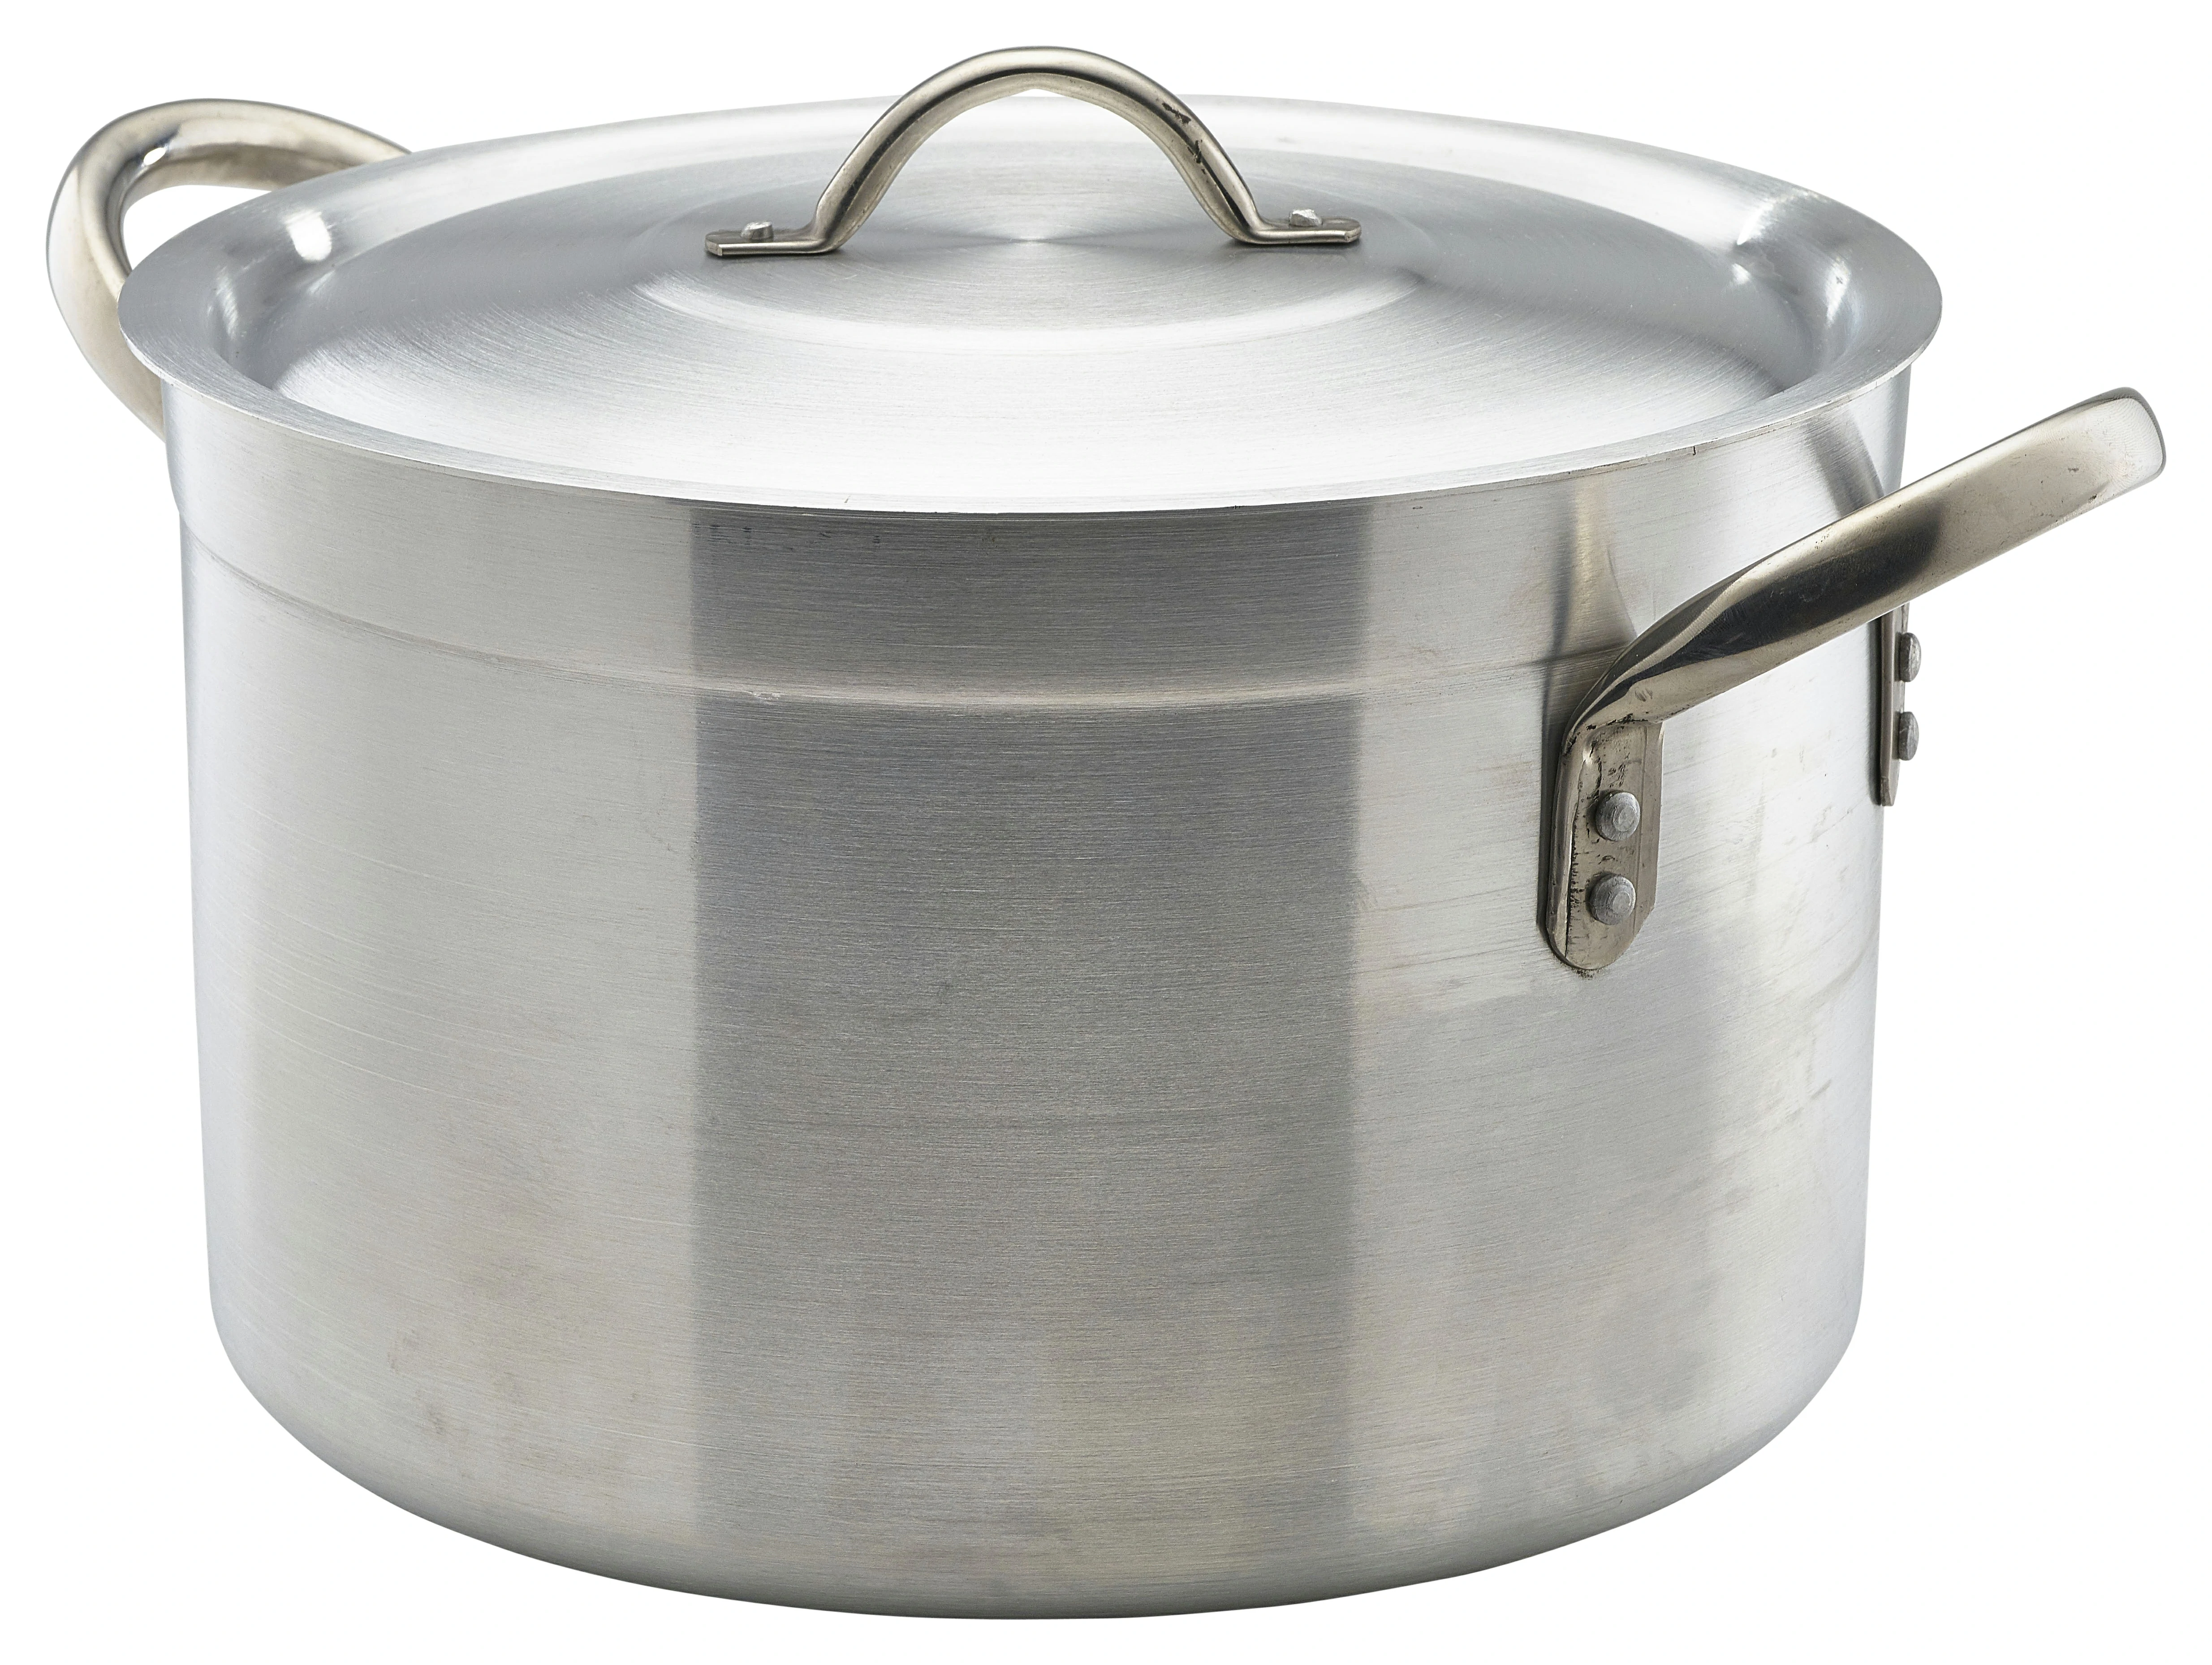 Aluminium Stewpan With Lid 24.5Litre